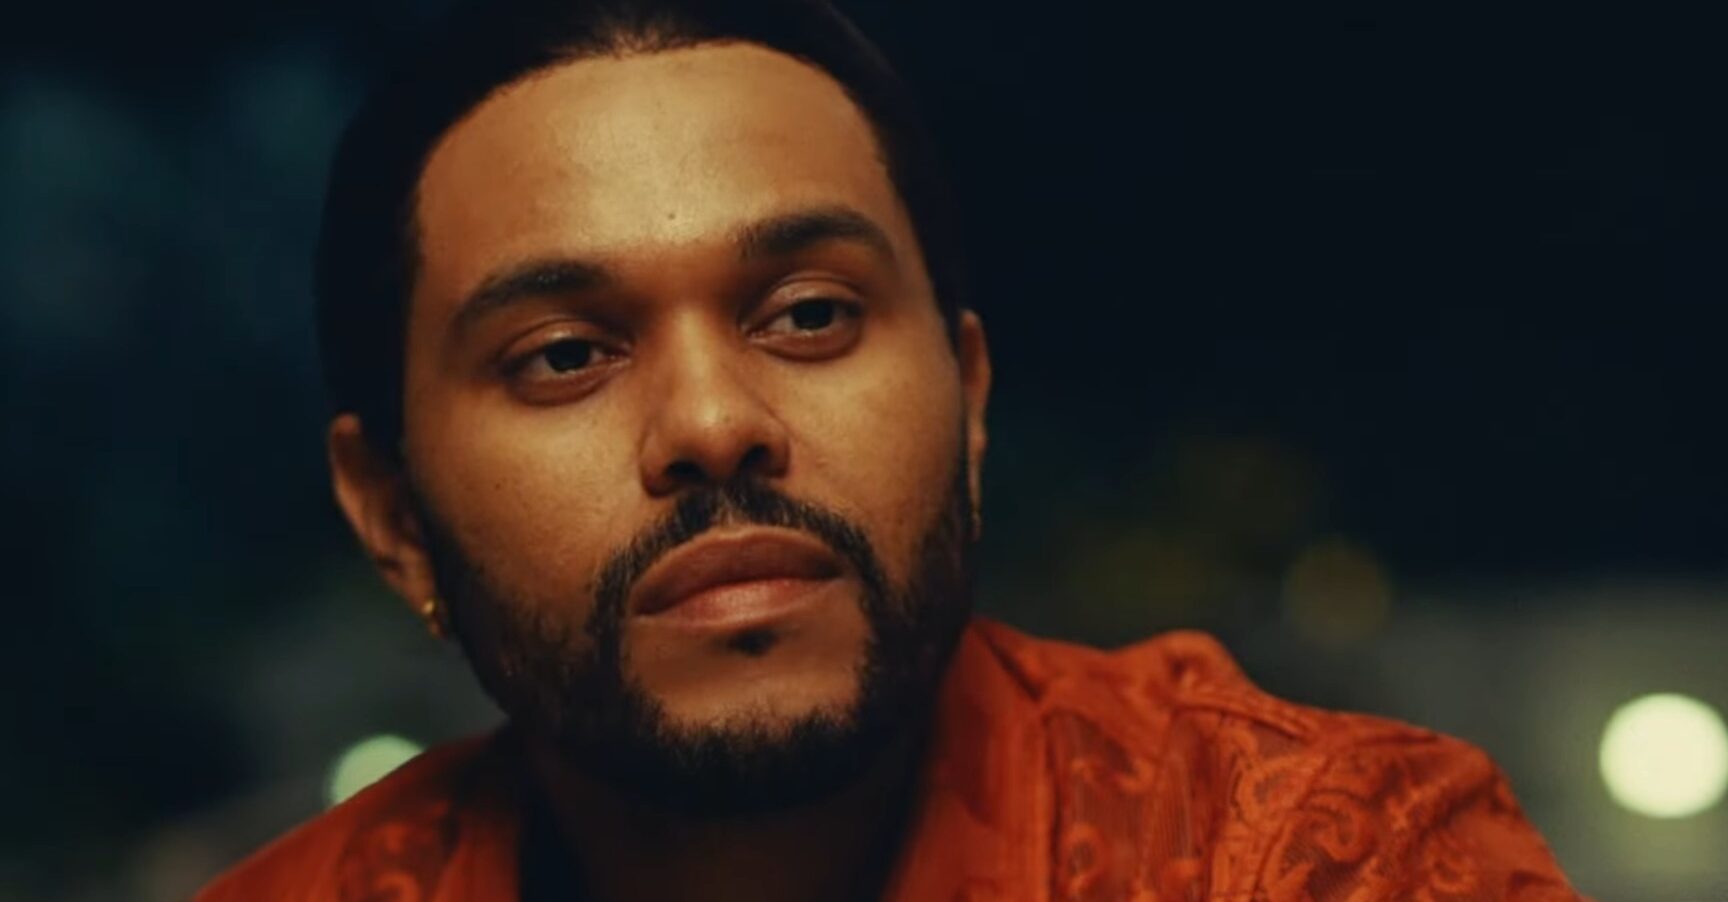 The Weeknd addresses backlash over ‘gross’ sex scene in ‘The Idol’